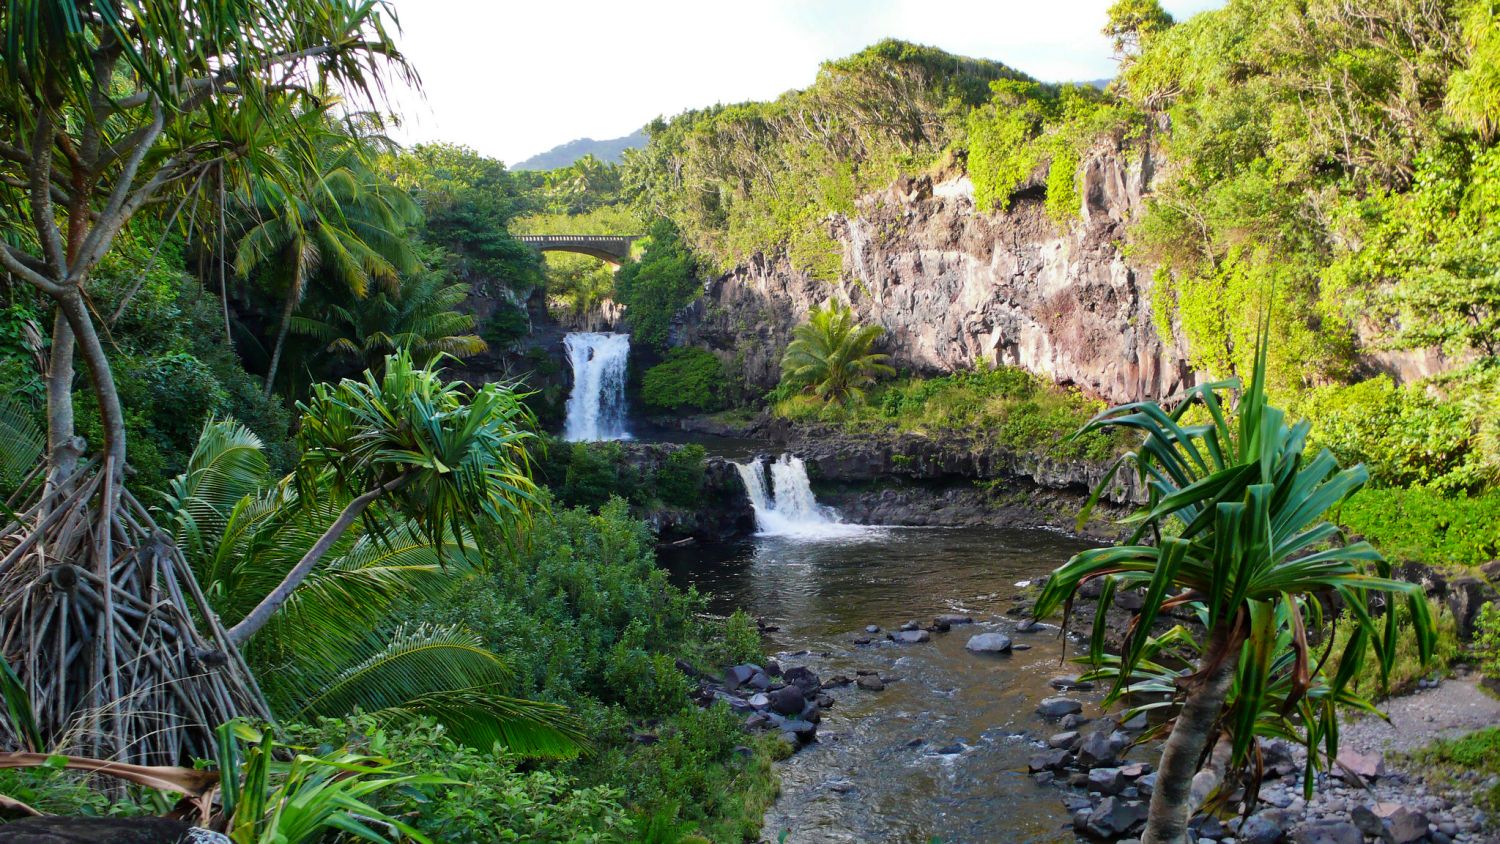 The Seven Sacred Pools of ‘Ohe’o Gulch in Maui, Hawaii